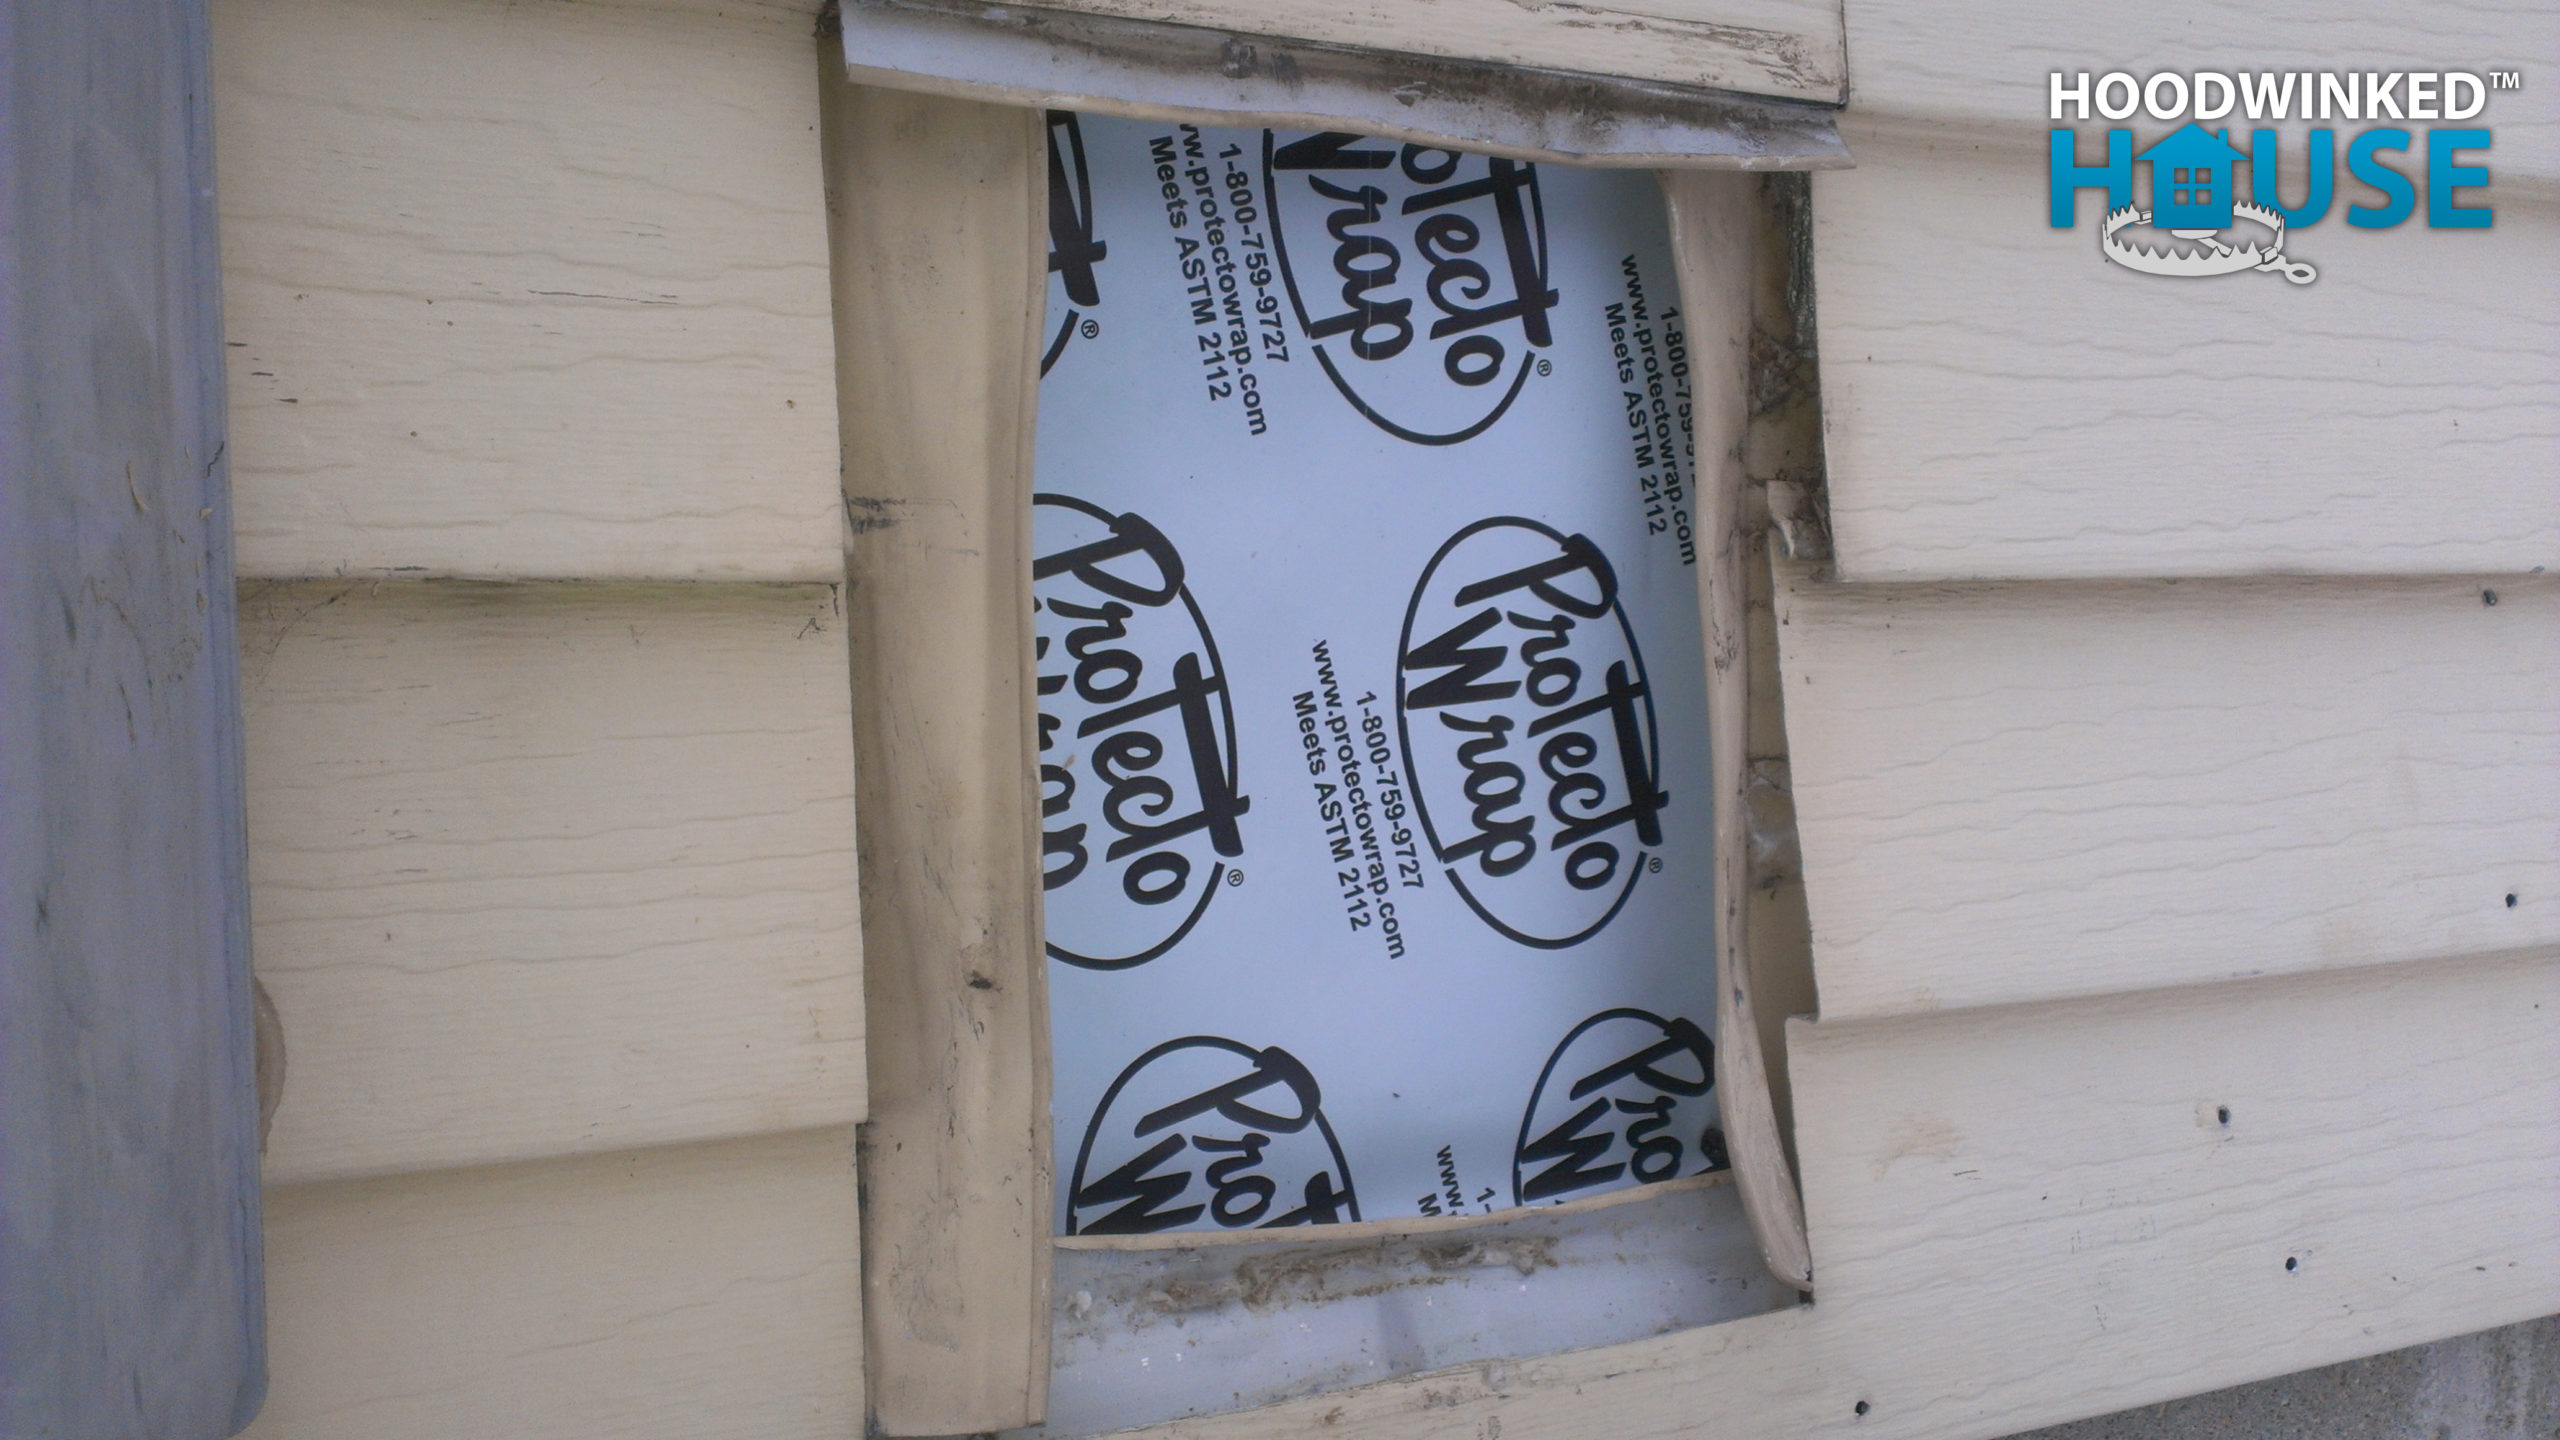 An old utility hole in a house siding is sealed up with patches of self-adhesive home wrap.